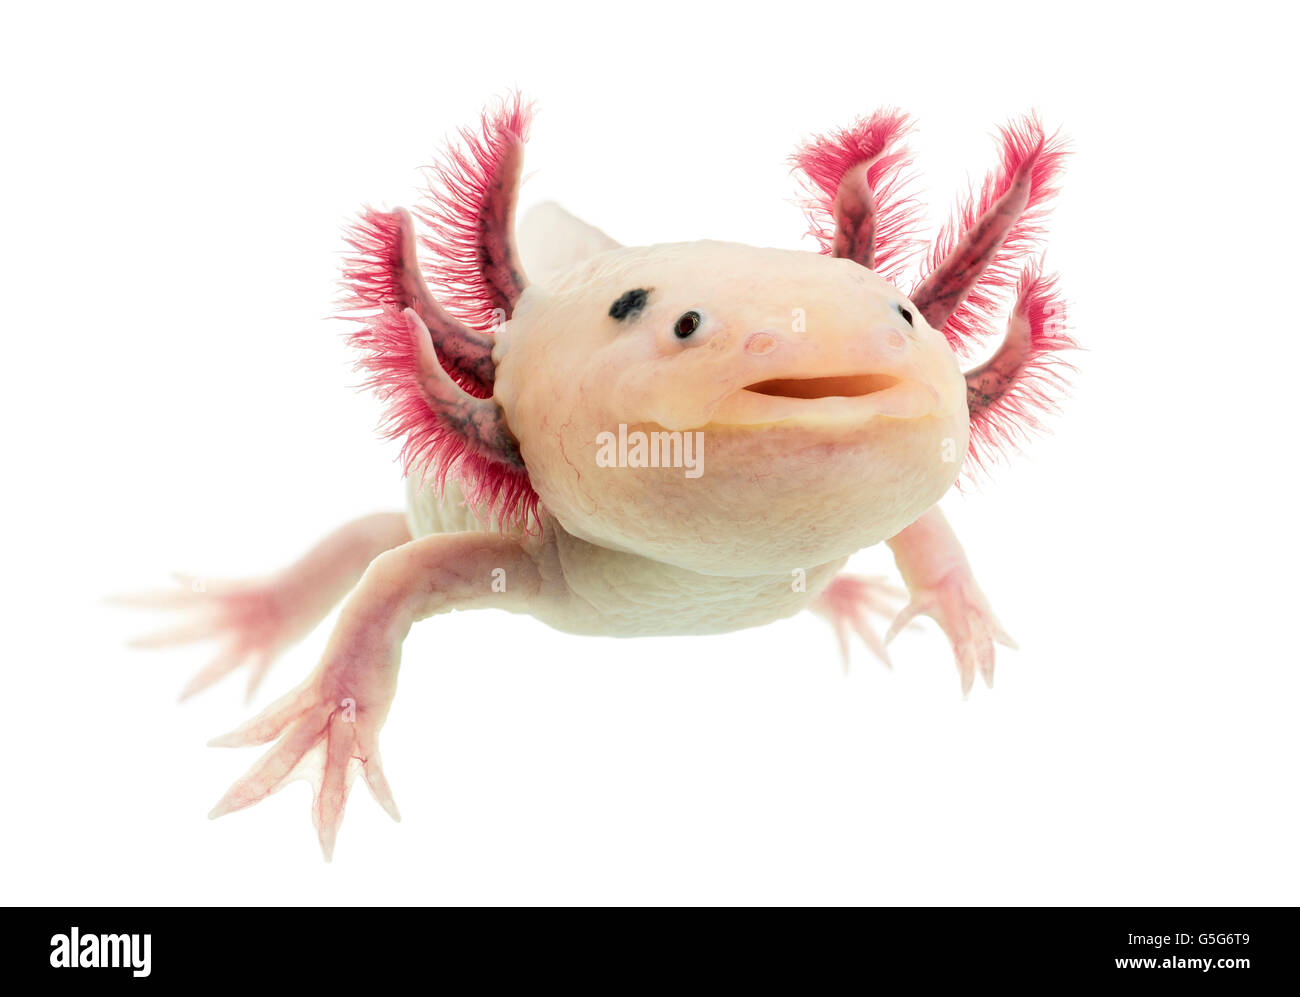 Axolotl (Ambystoma mexicanum) in front of a white background Stock Photo